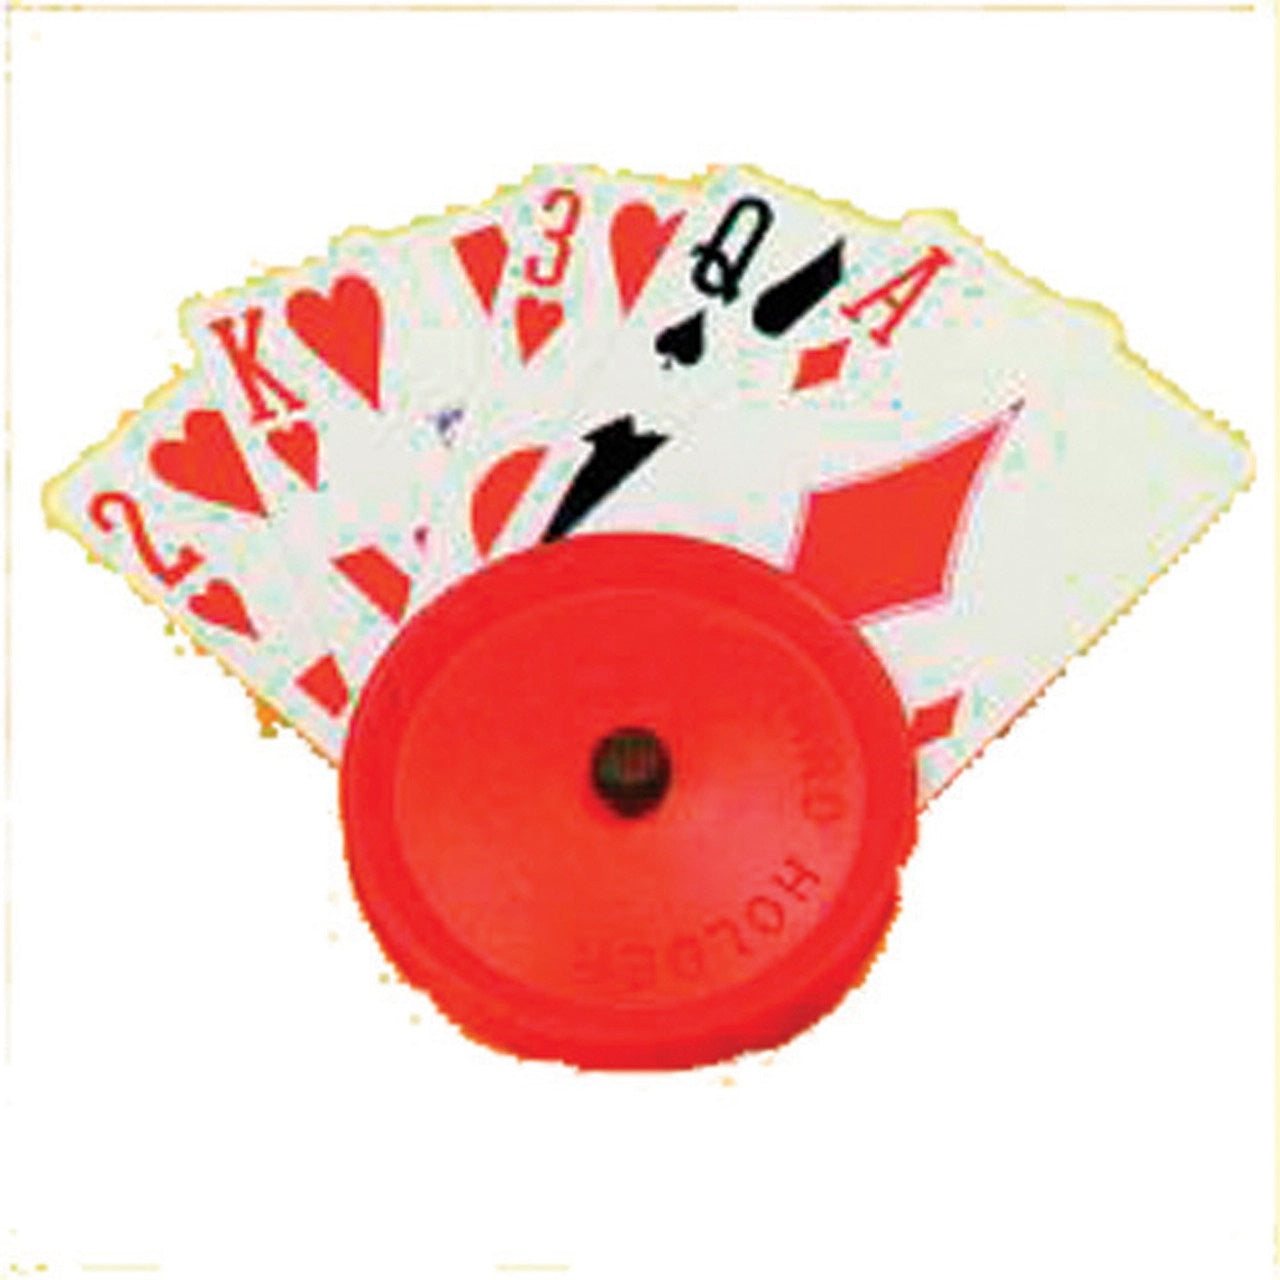 A red Round Disk Playing Card holder holding five large number and symbol playing cards.